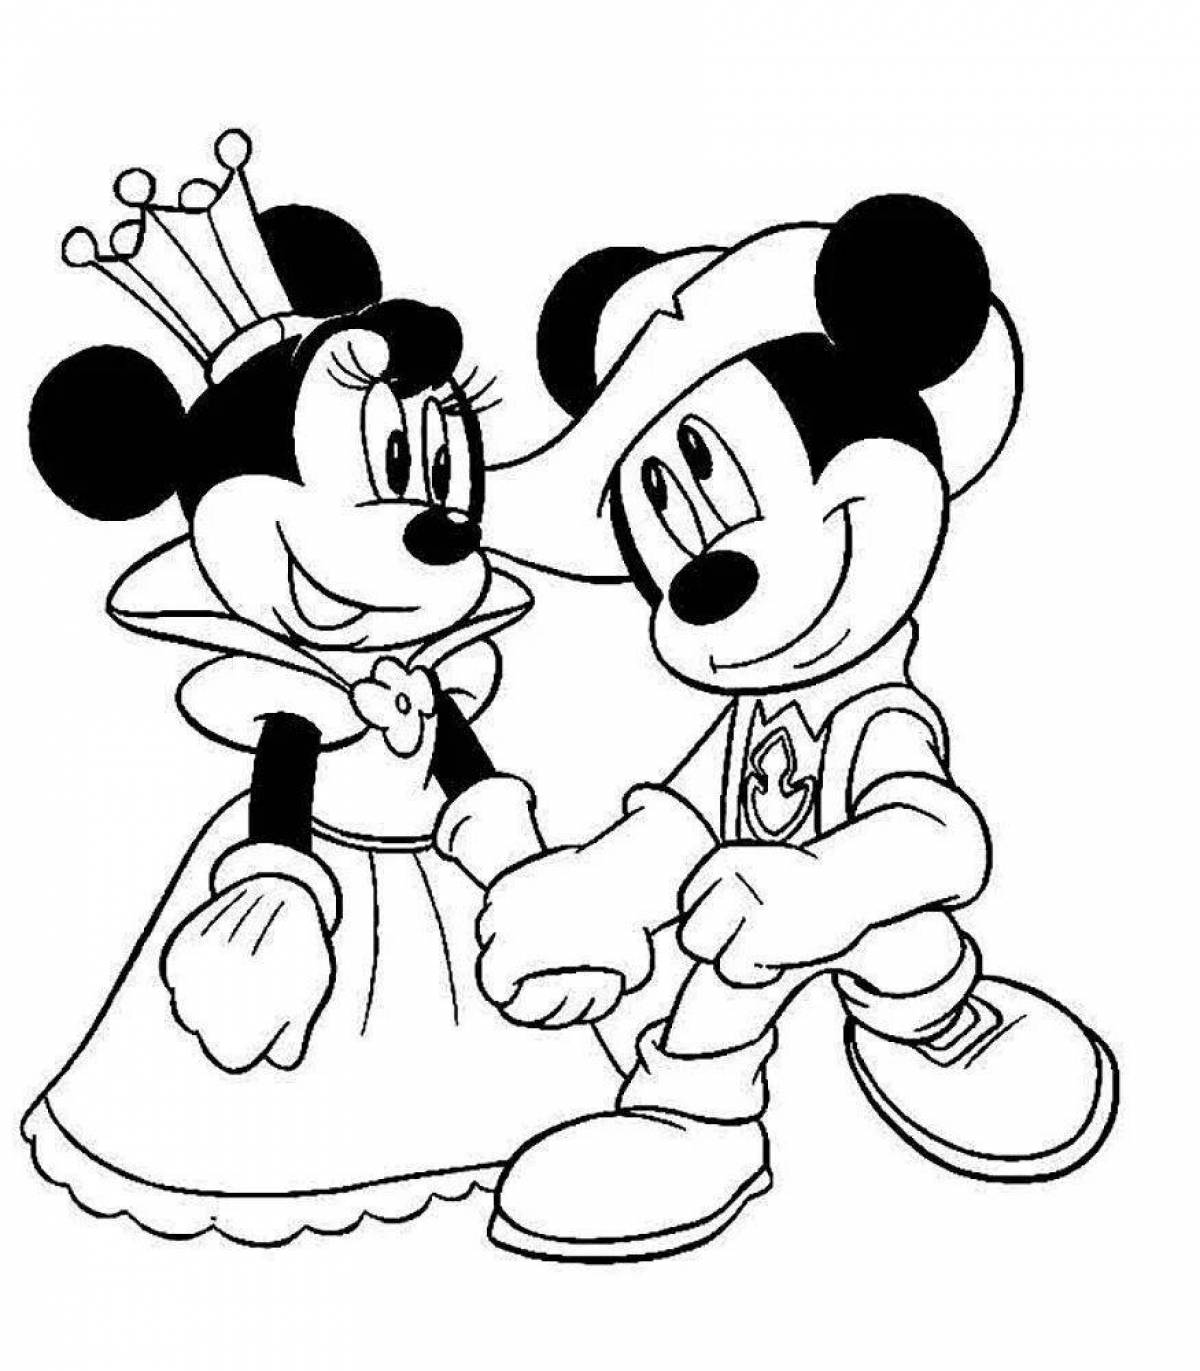 Mickey Mouse and Minnie Mouse #12